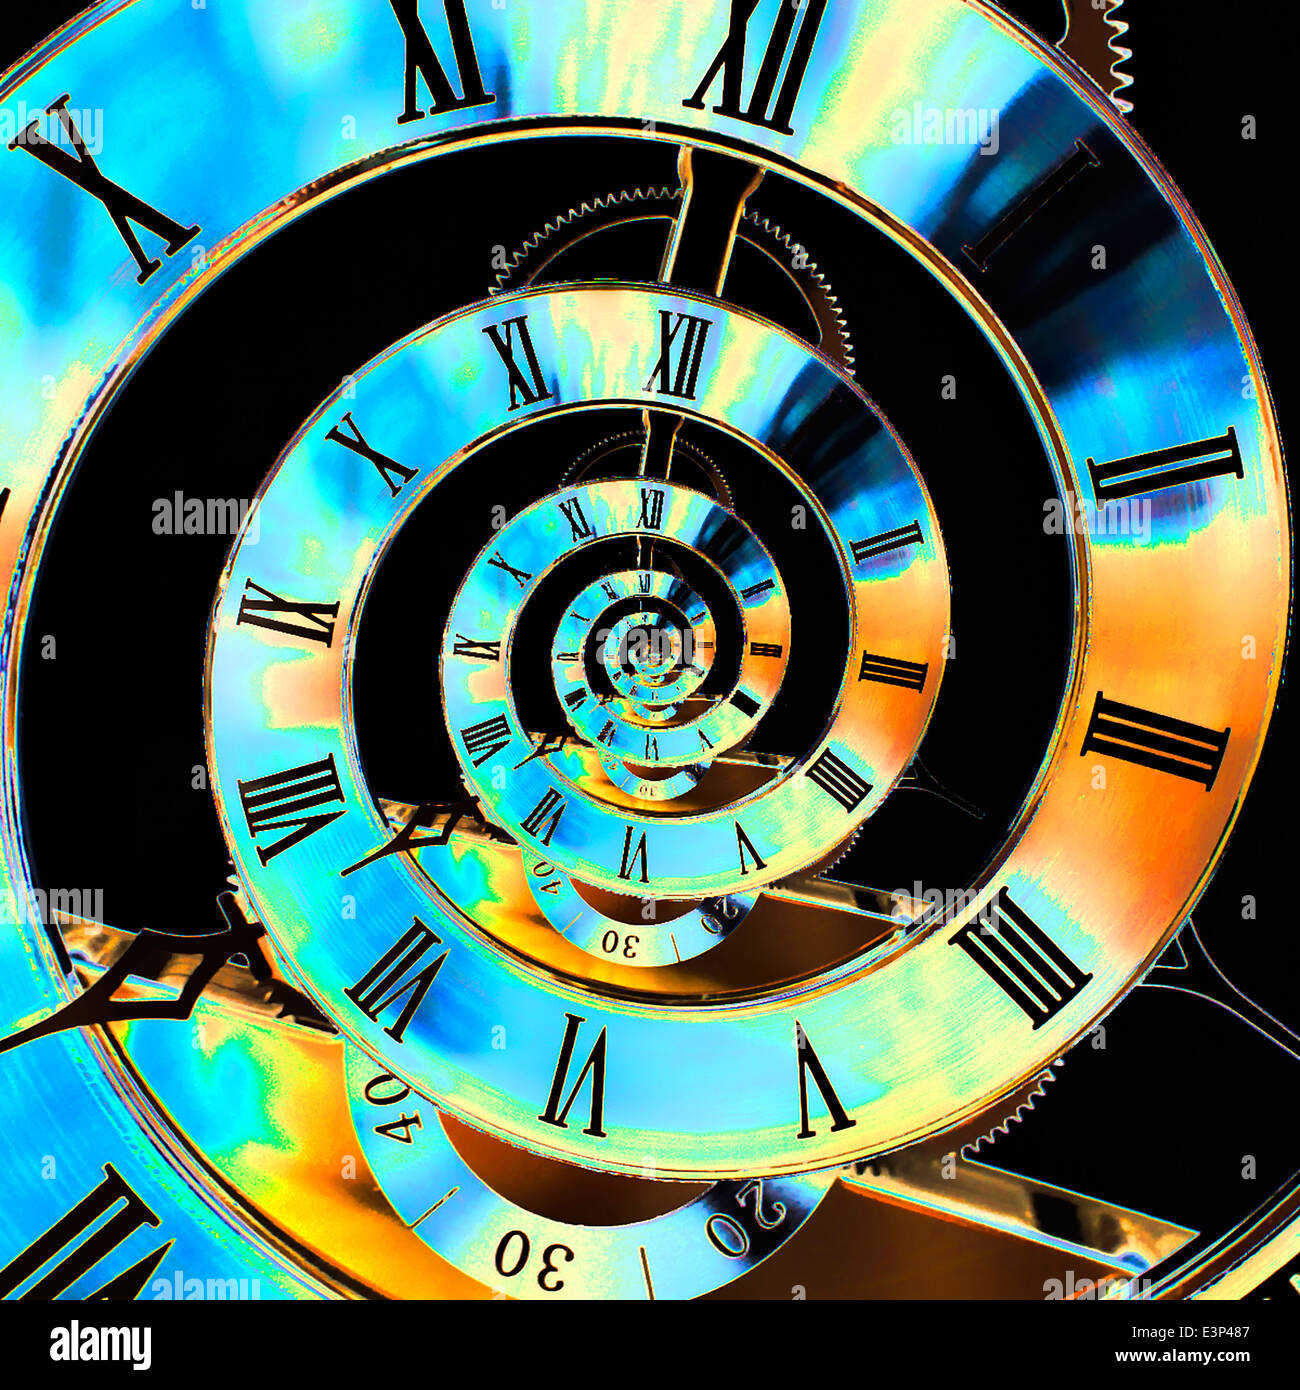 An image of a clock face given an abstract treatment in photoshop. Stock Photo